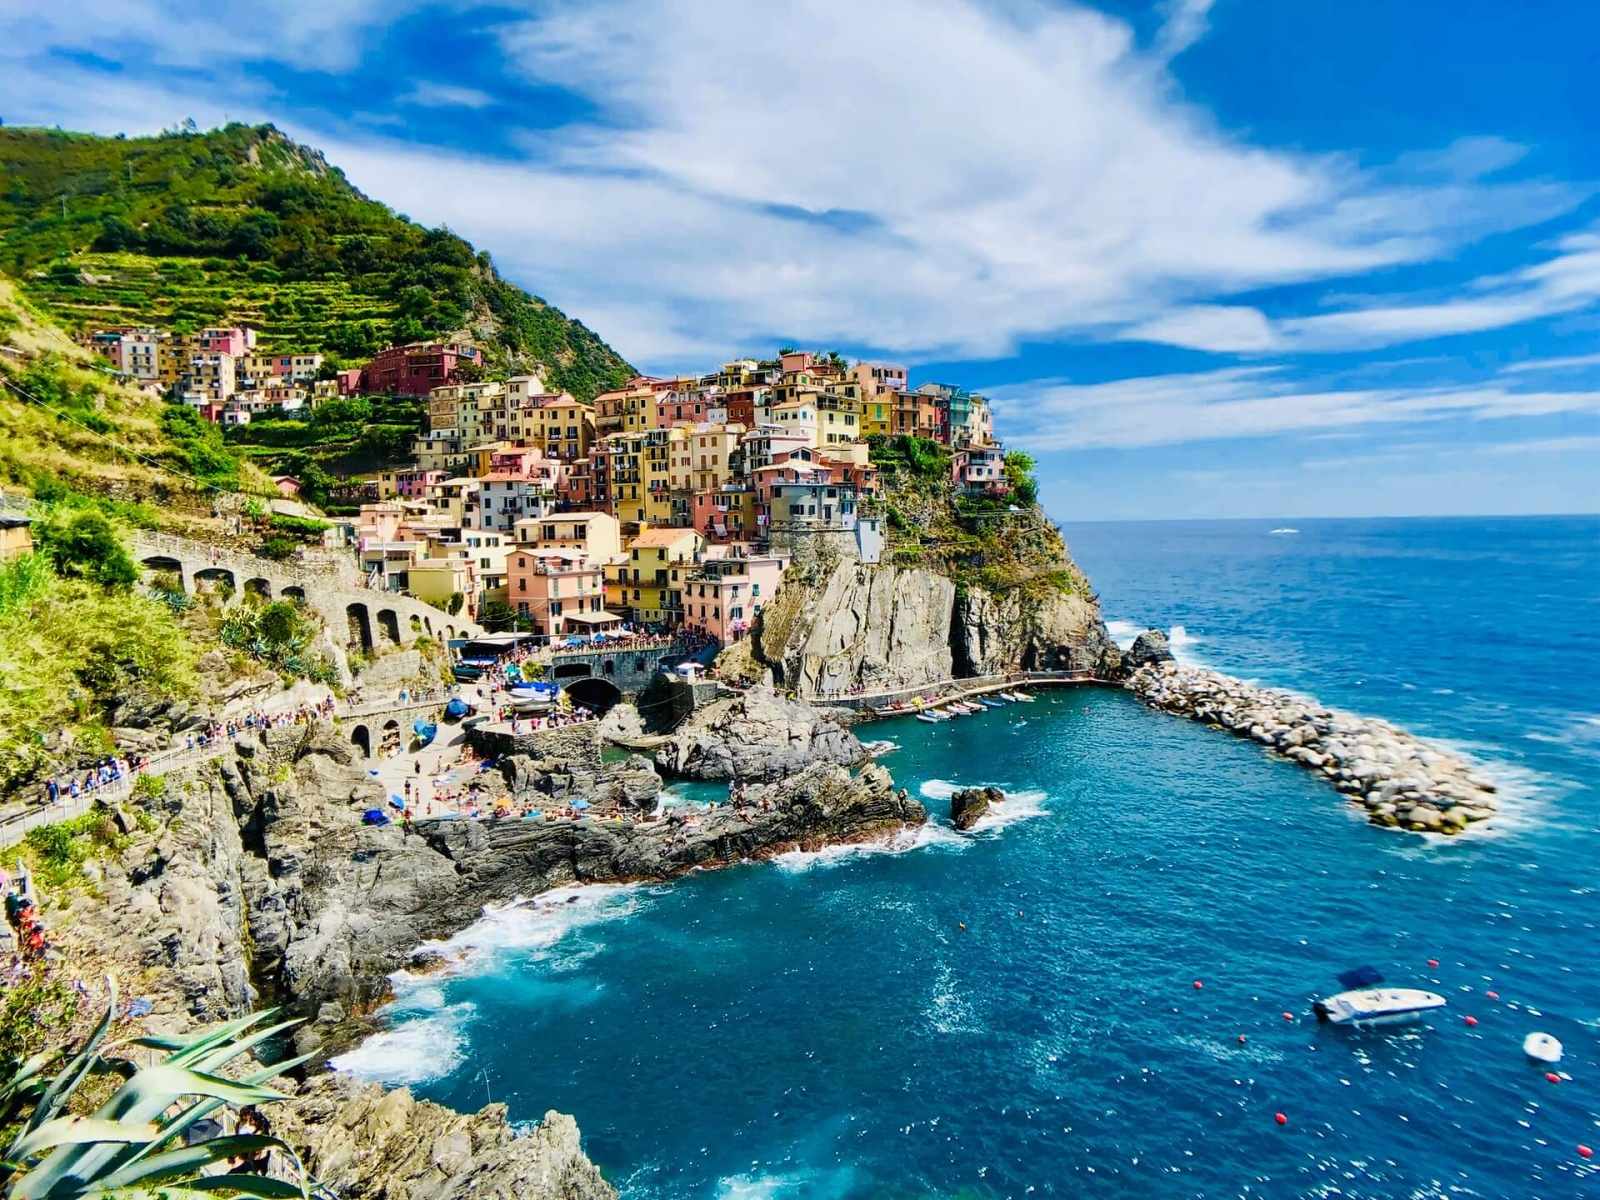 Cinque Terre stunning views of the peninsula